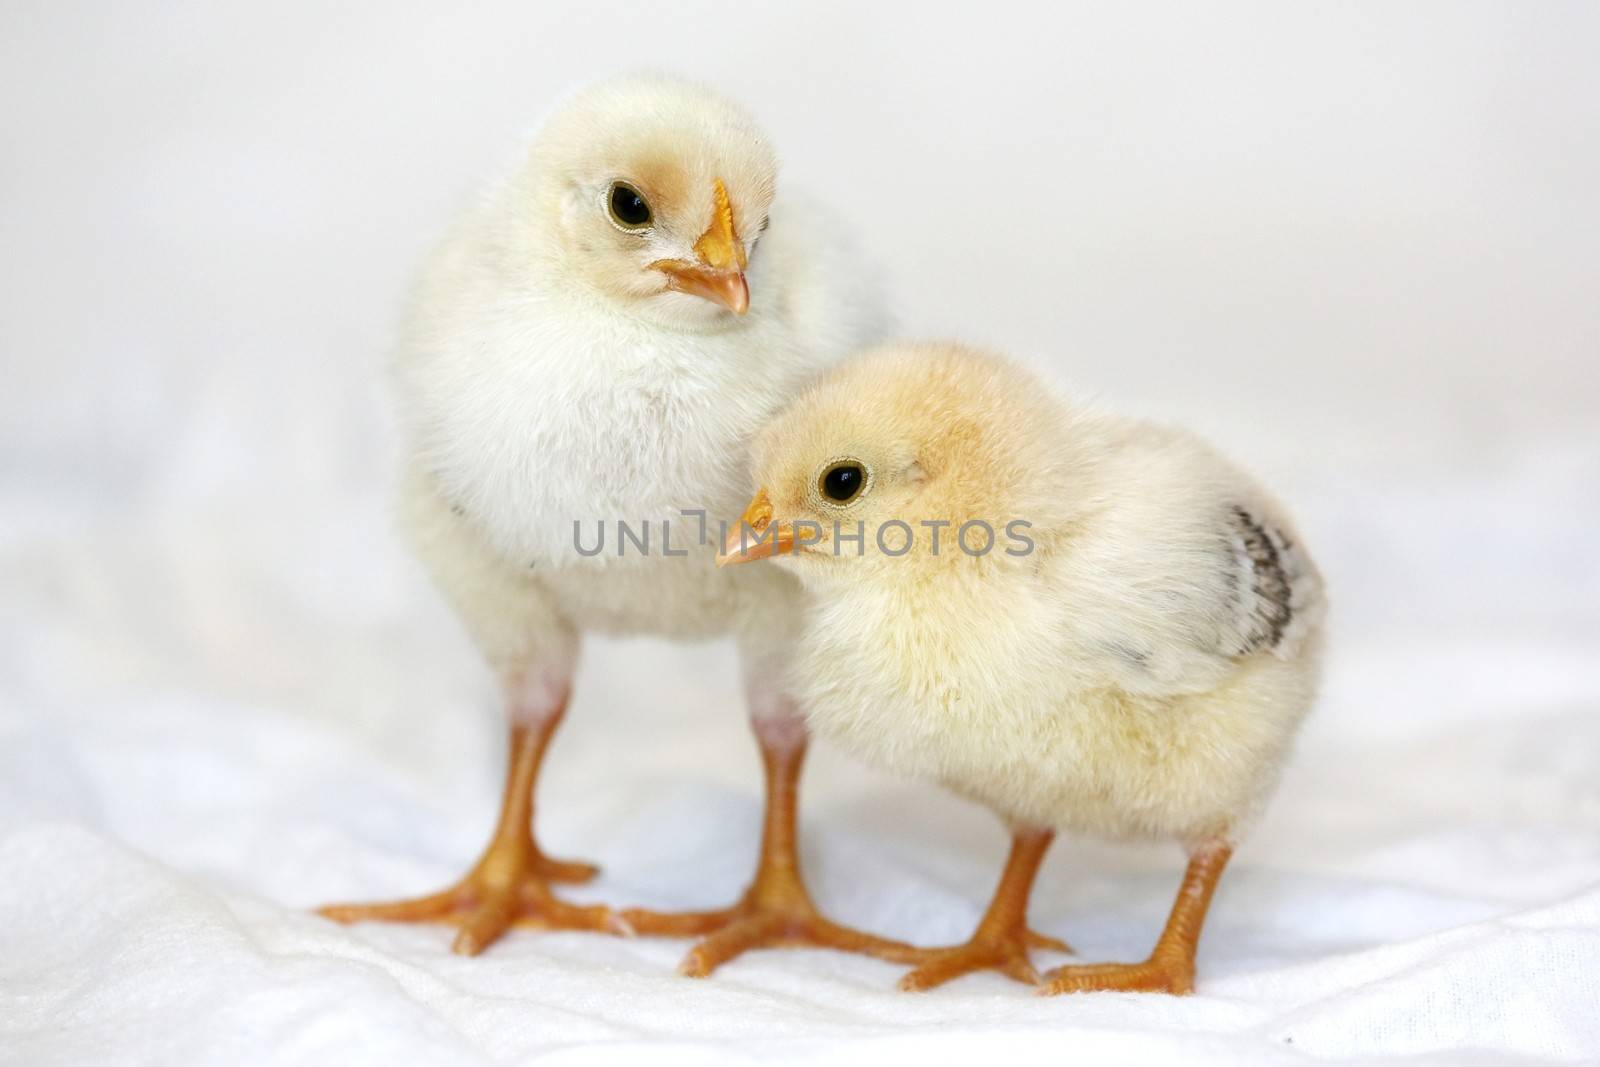 Two tiny yellow chickens  with orange legs and beaks